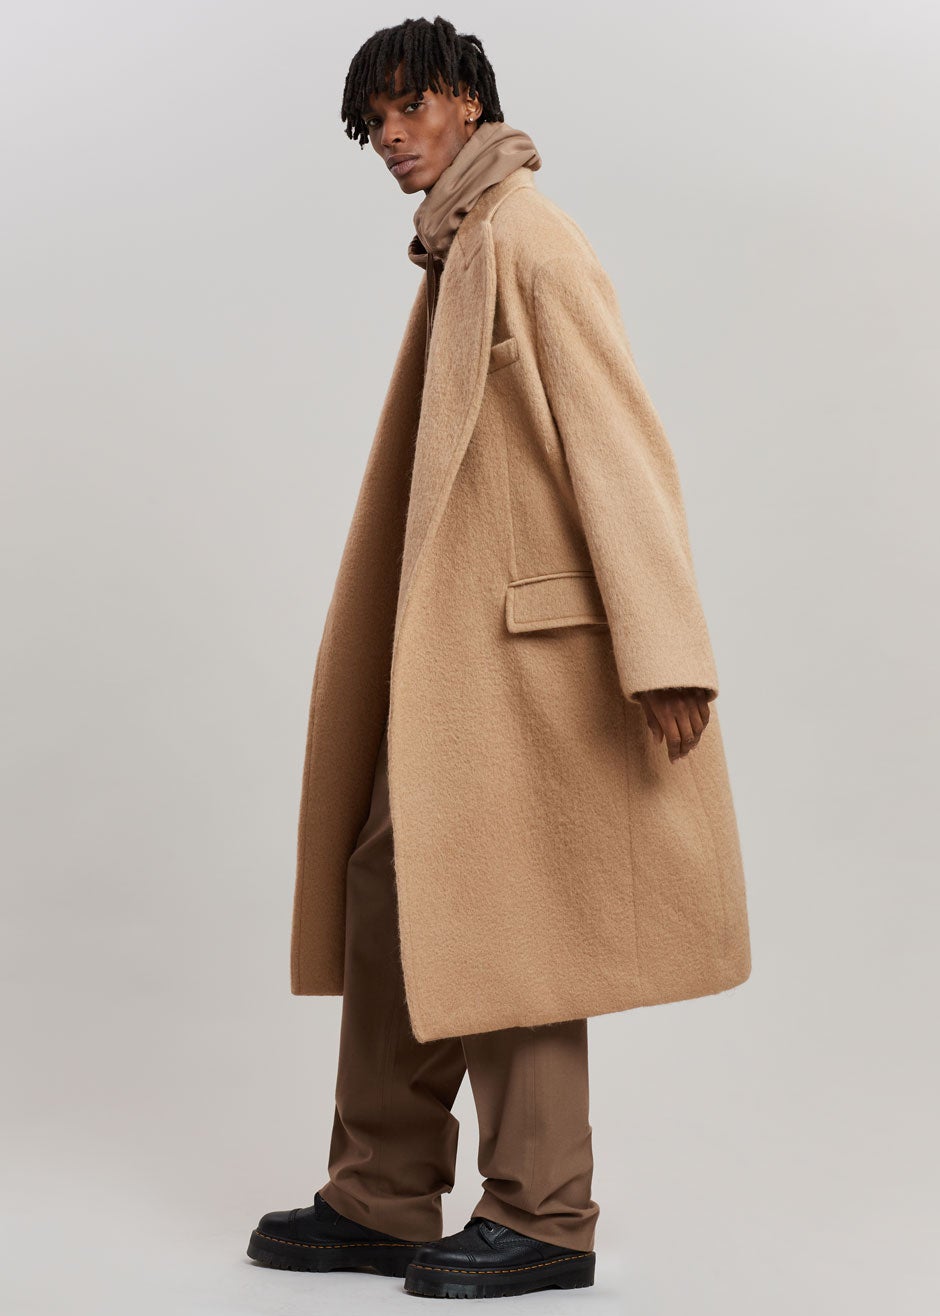 How to Wear Camel this Autumn and Winter [camel coats, suits and blazer] -  Hockerty